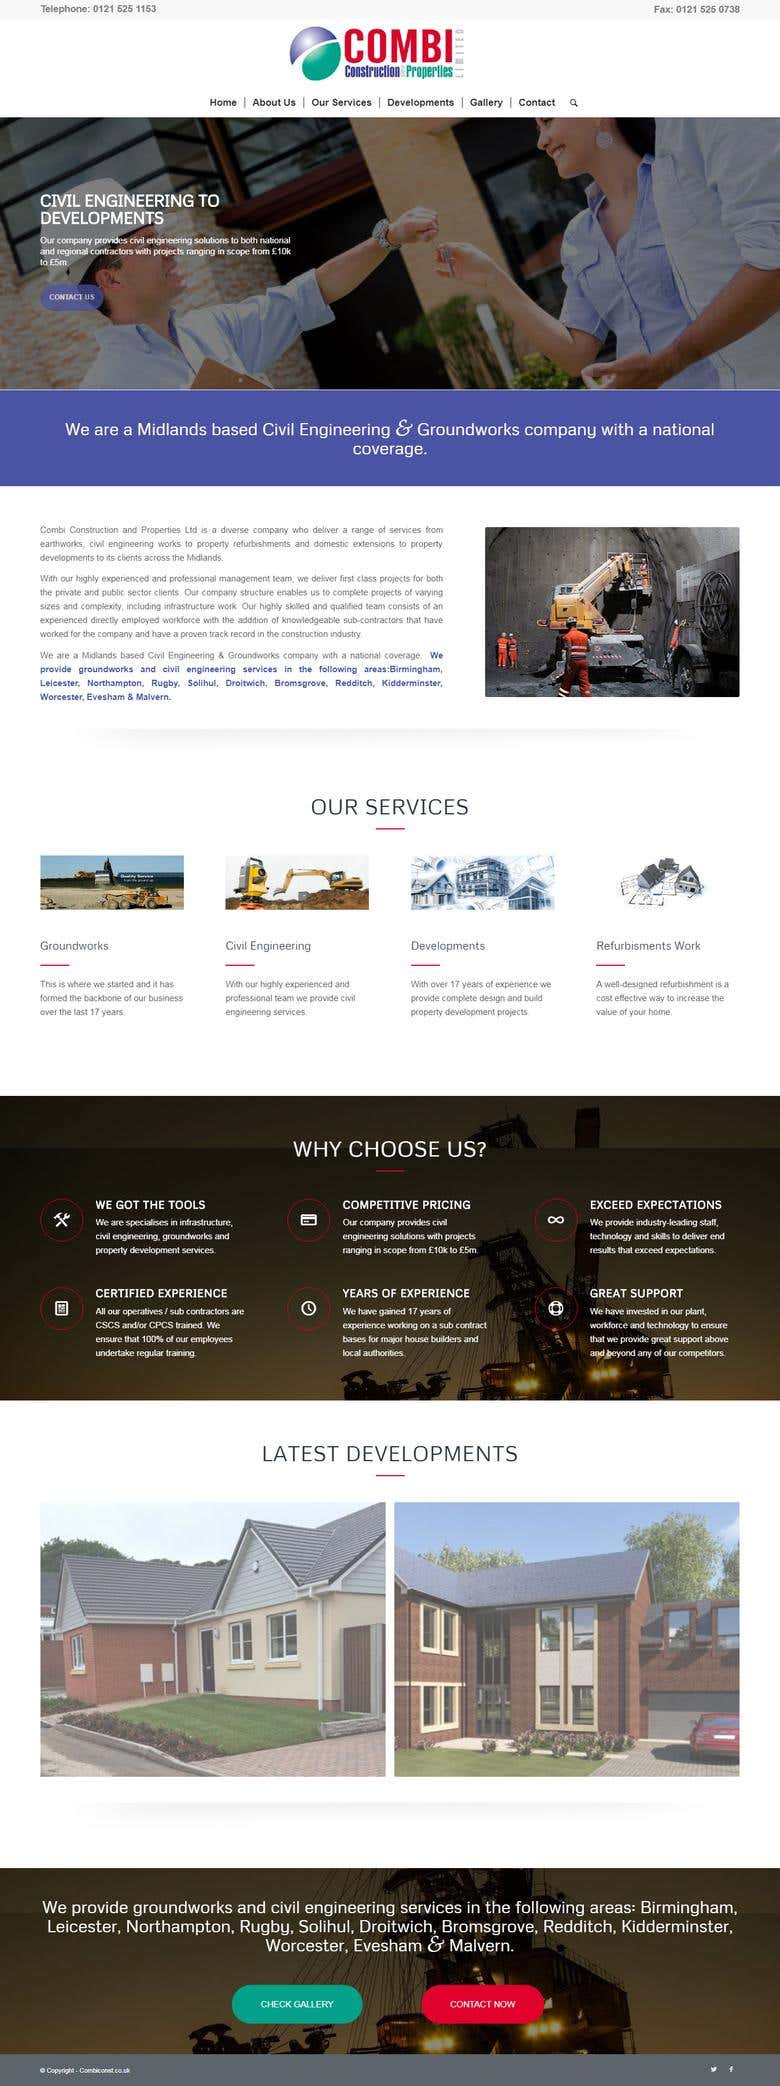 Website for a Construction Company using Enfold Theme